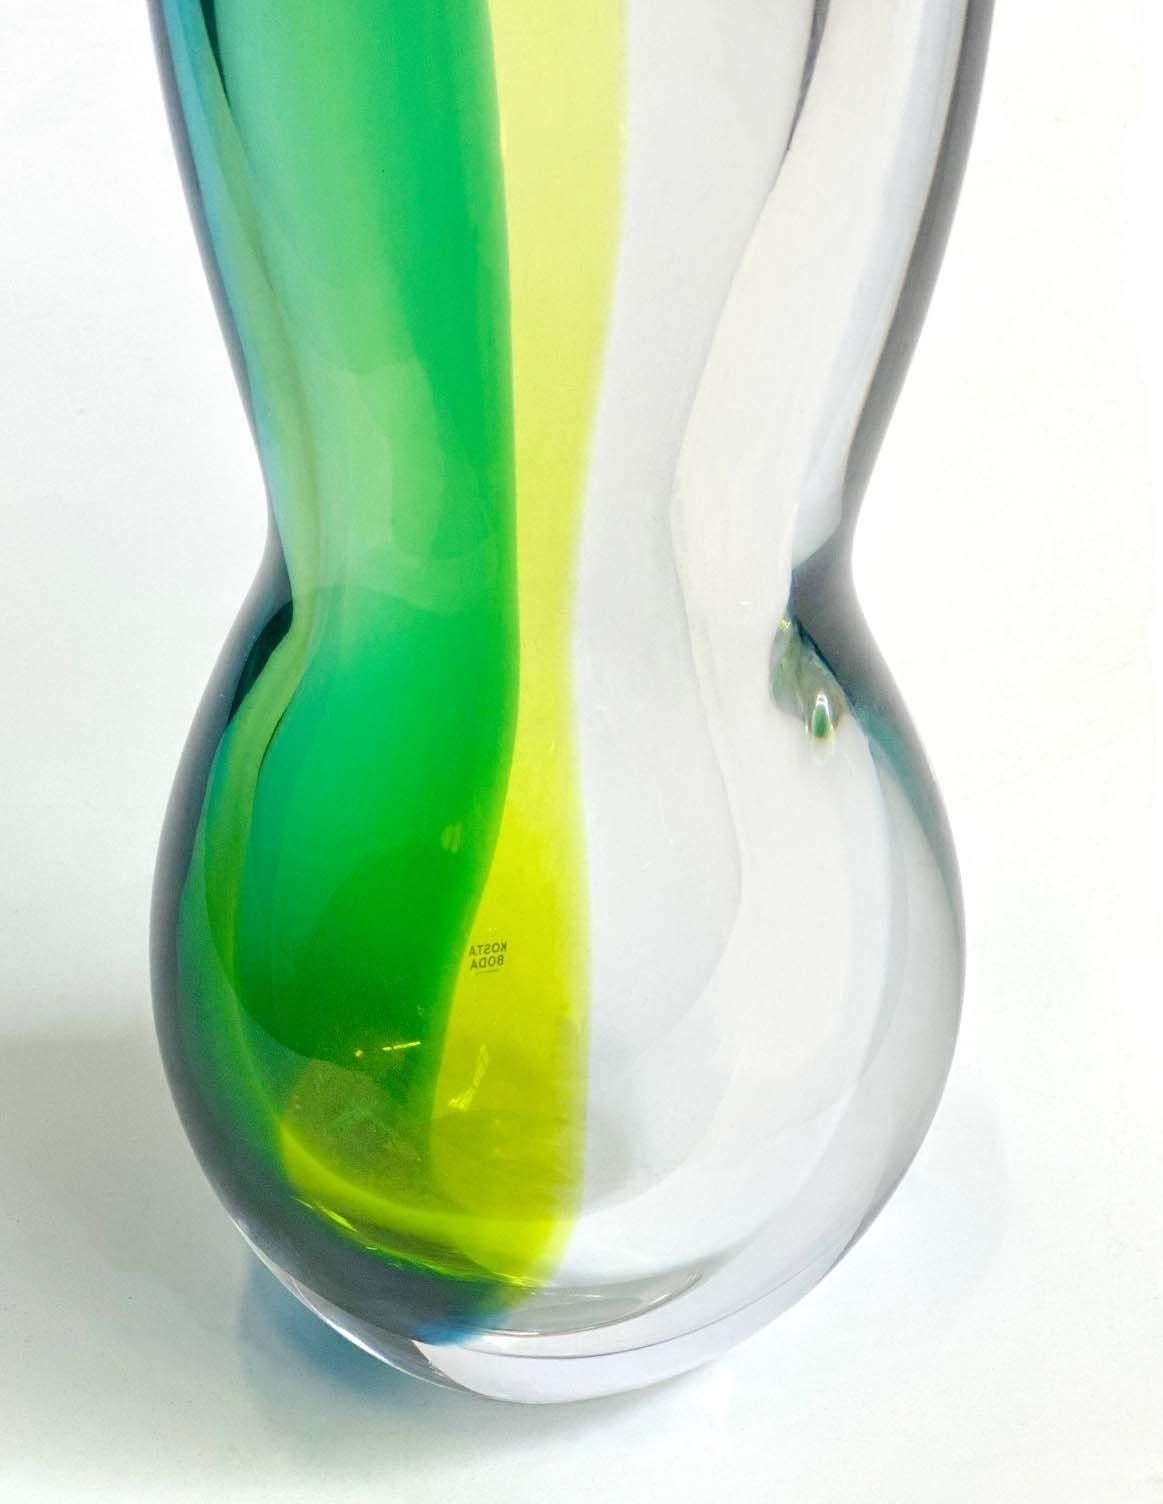 Stunning Italian vase adorned with captivating hues of blue, green, and yellow, crafted with Murano glass by Kosta Boda. The vibrant color palette of blue, green, and yellow immediately catches the eye, evoking a sense of energy and vitality. The